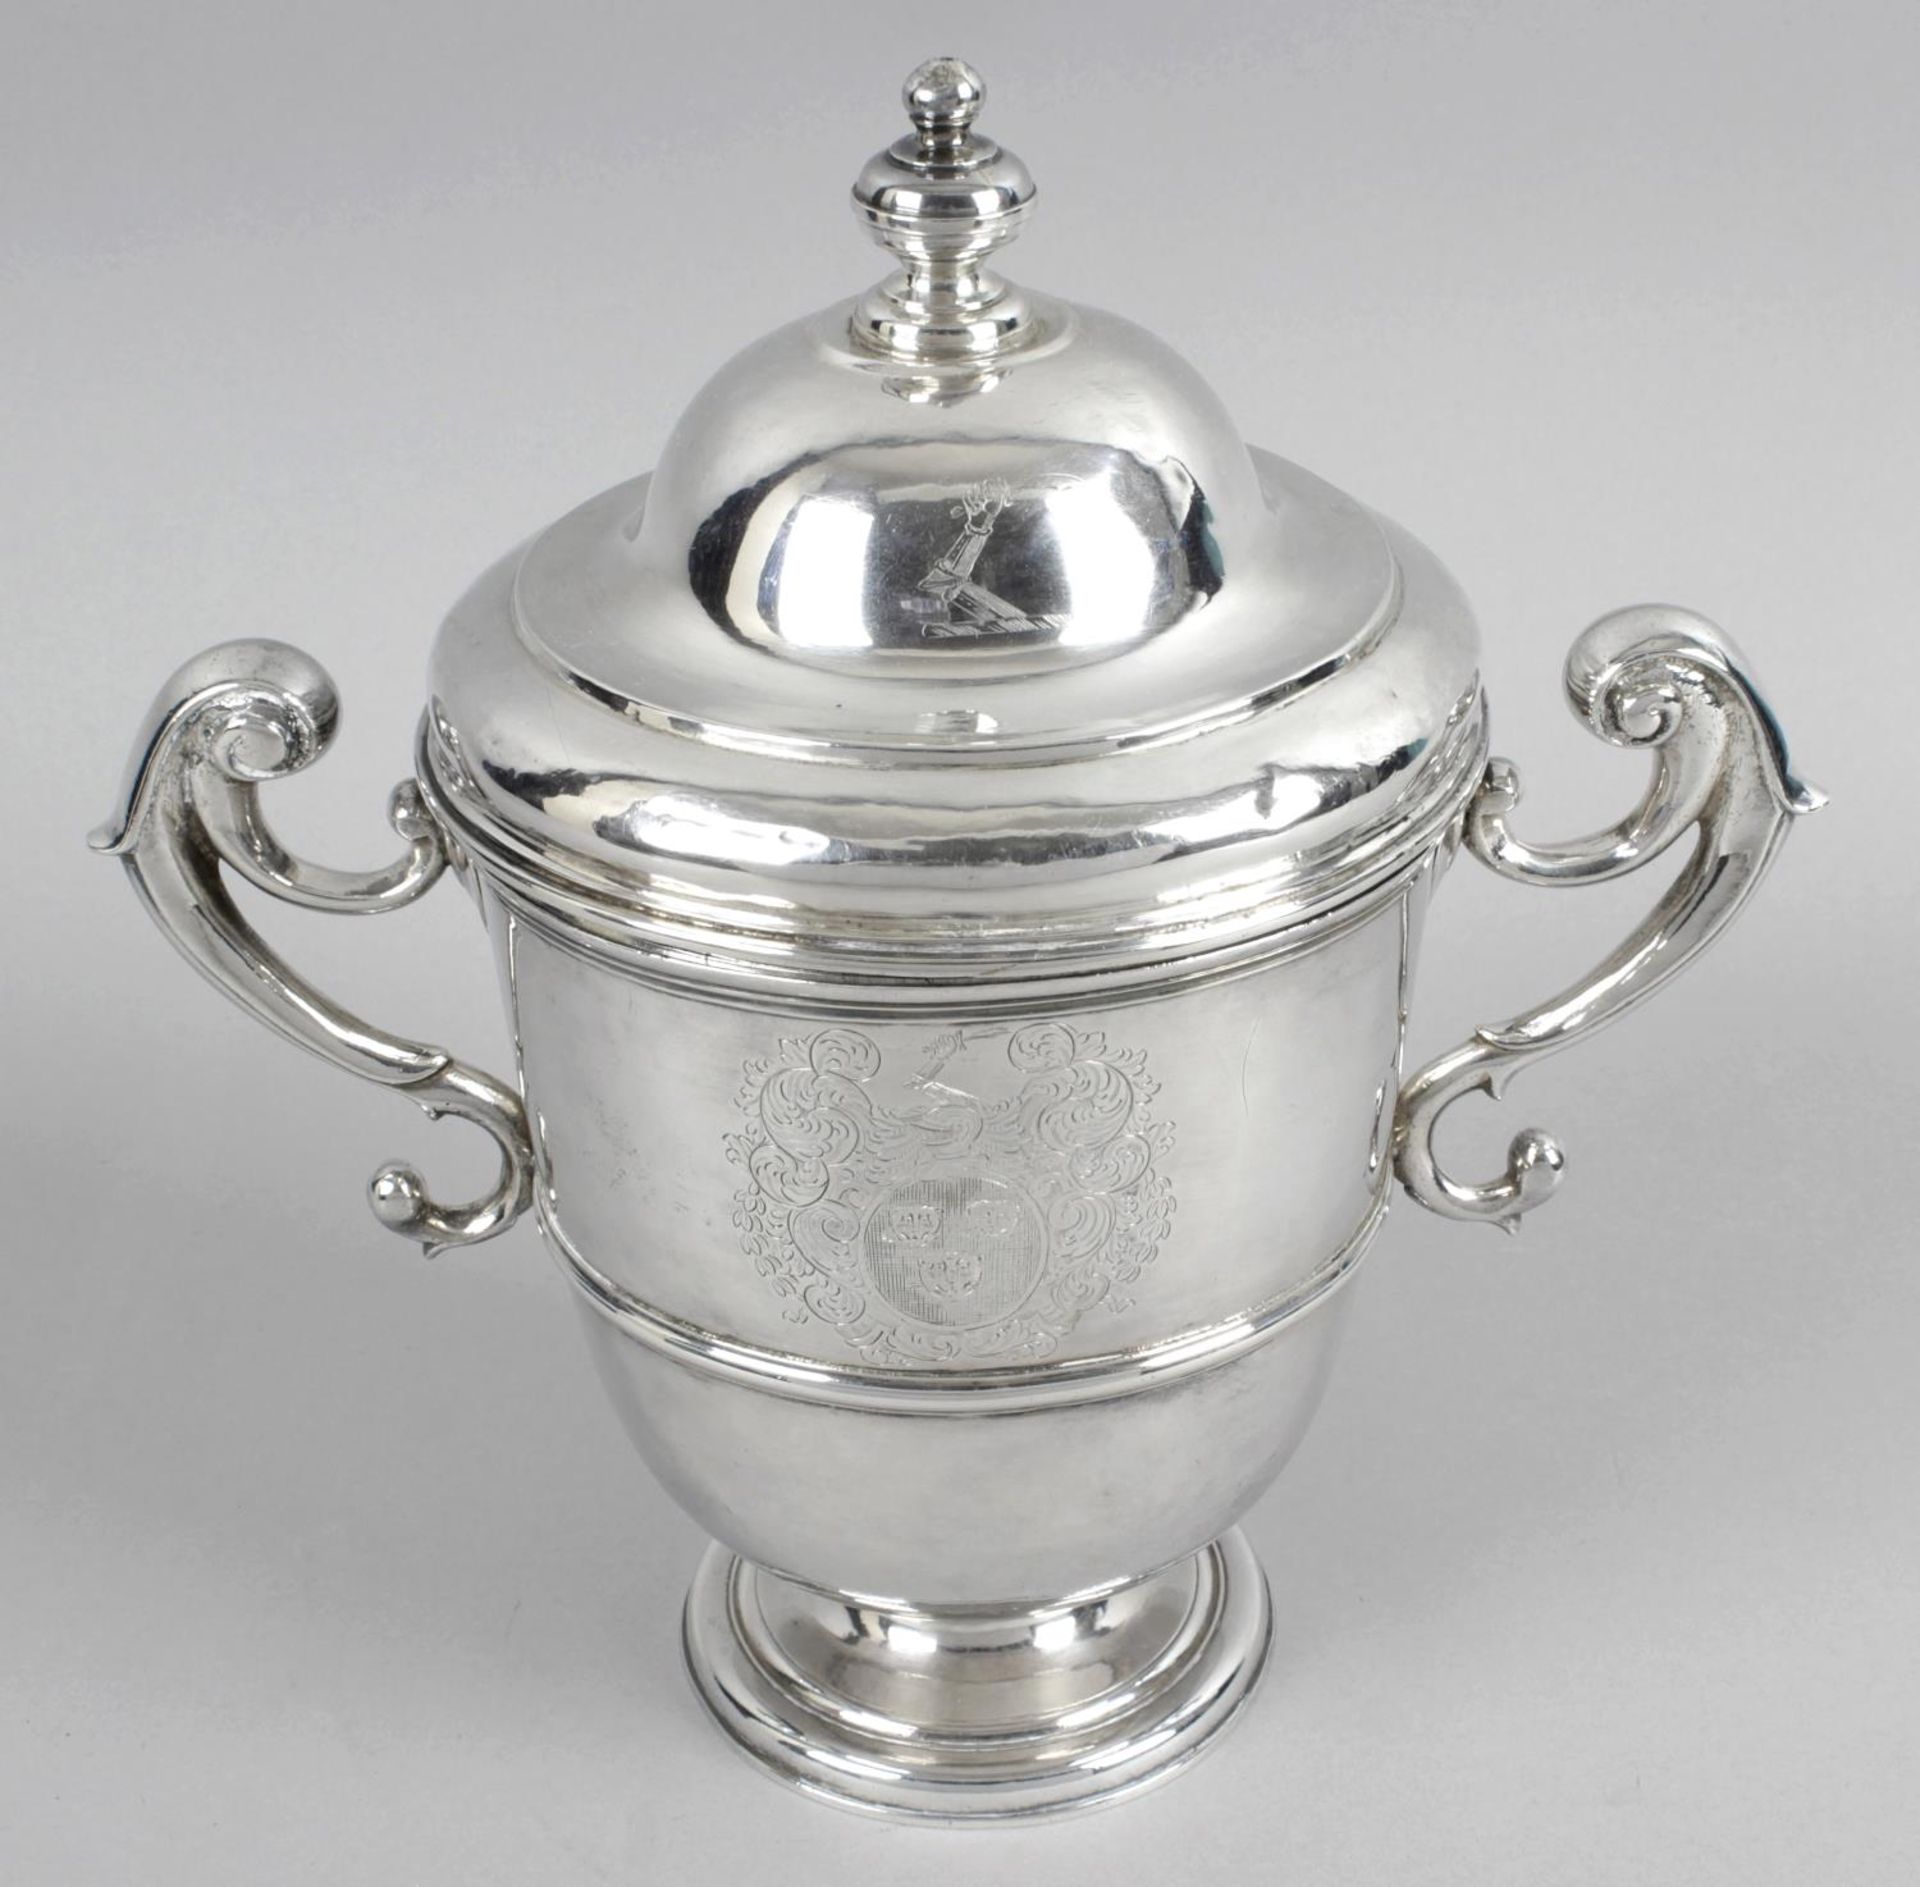 An early 18th century Irish silver twin-handled cup and cover,